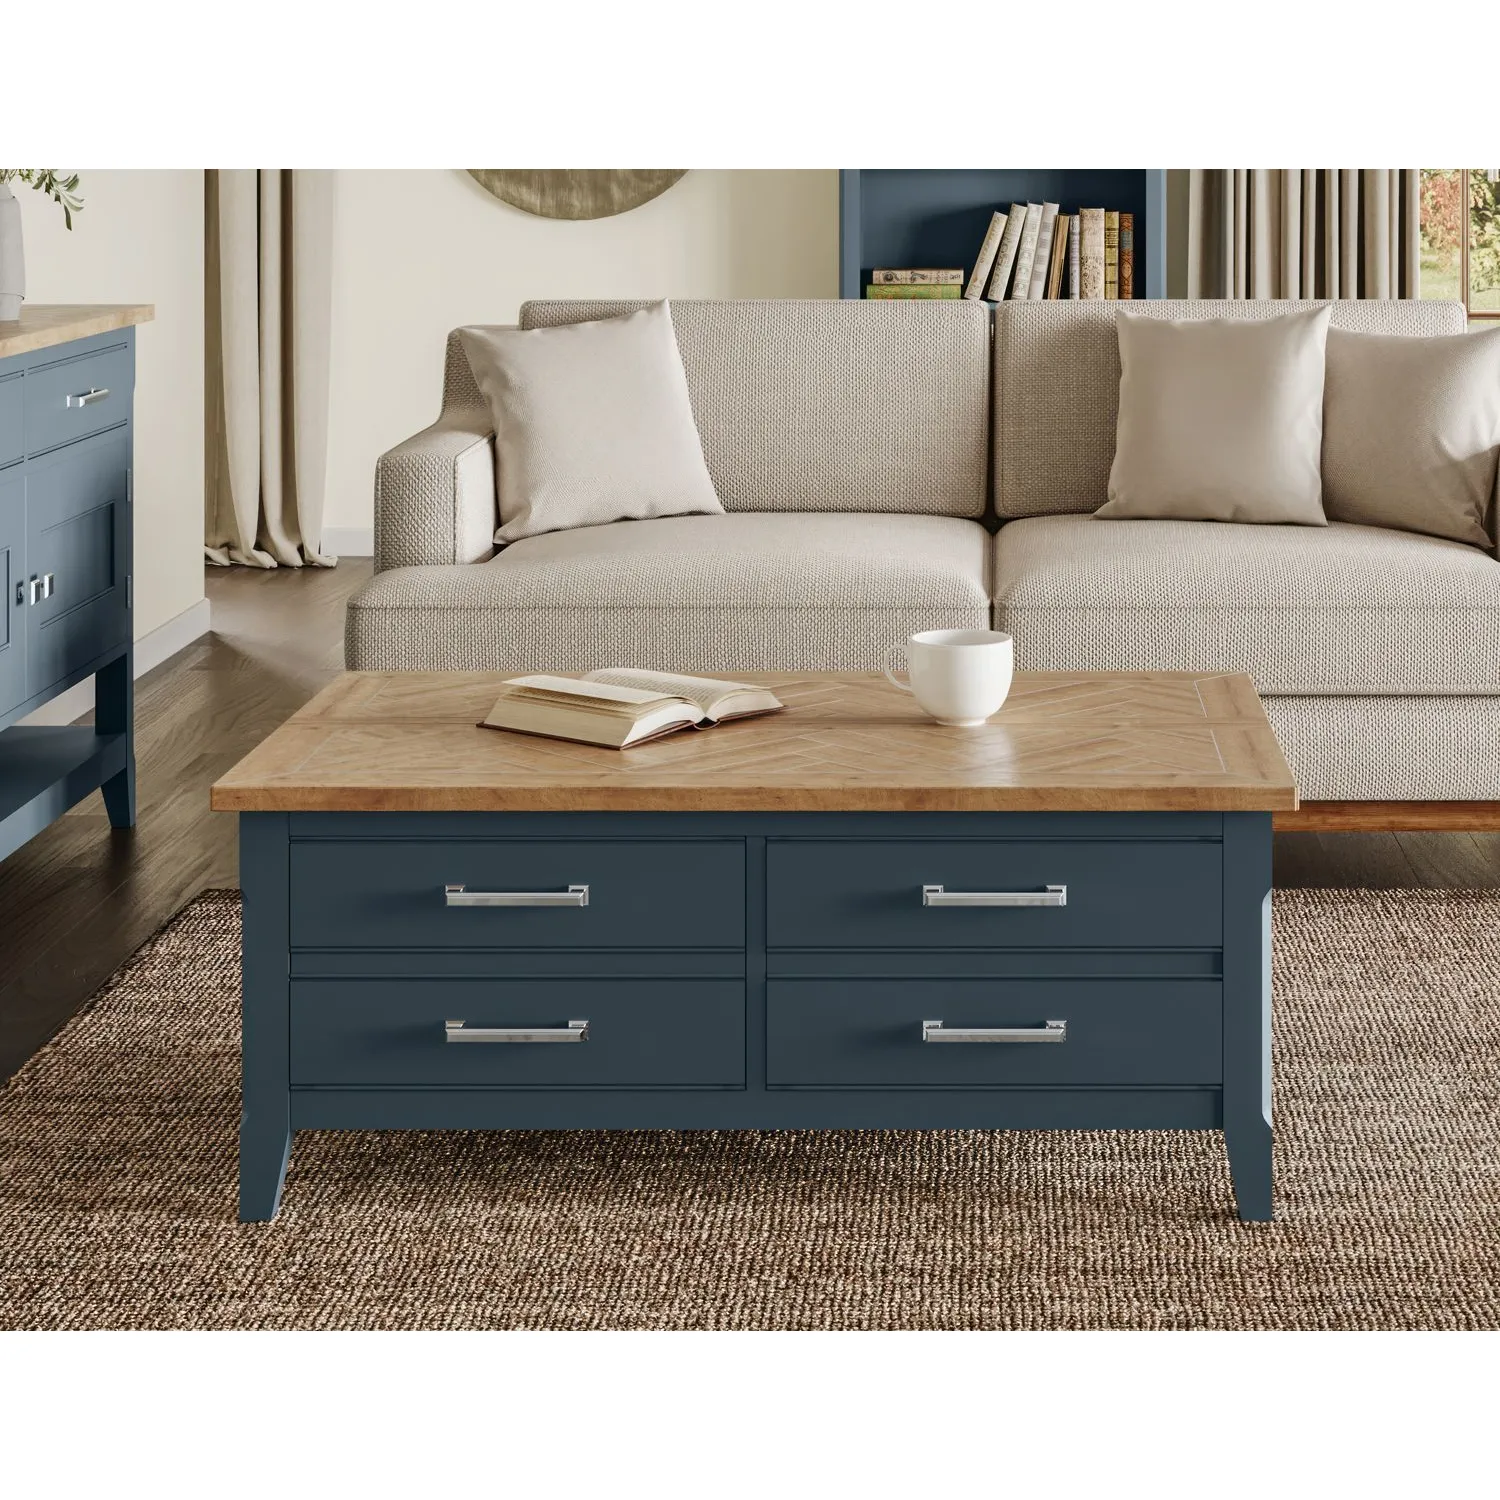 Signature Blue Coffee Table with drawers And hidden storage trunk